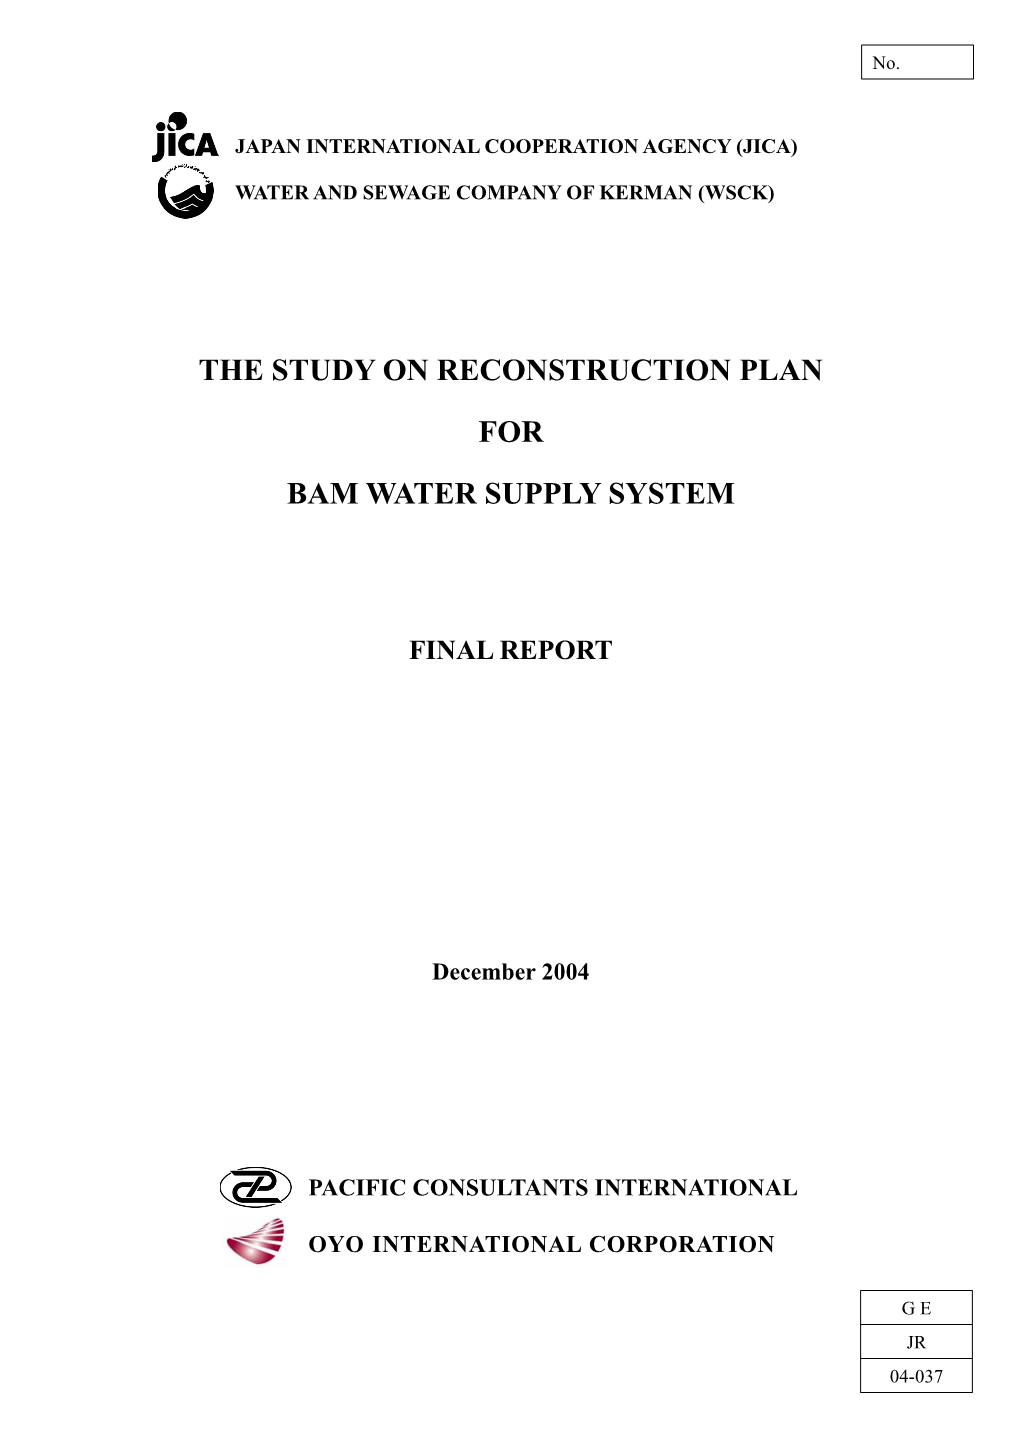 The Study on Reconstruction Plan for Bam Water Supply System